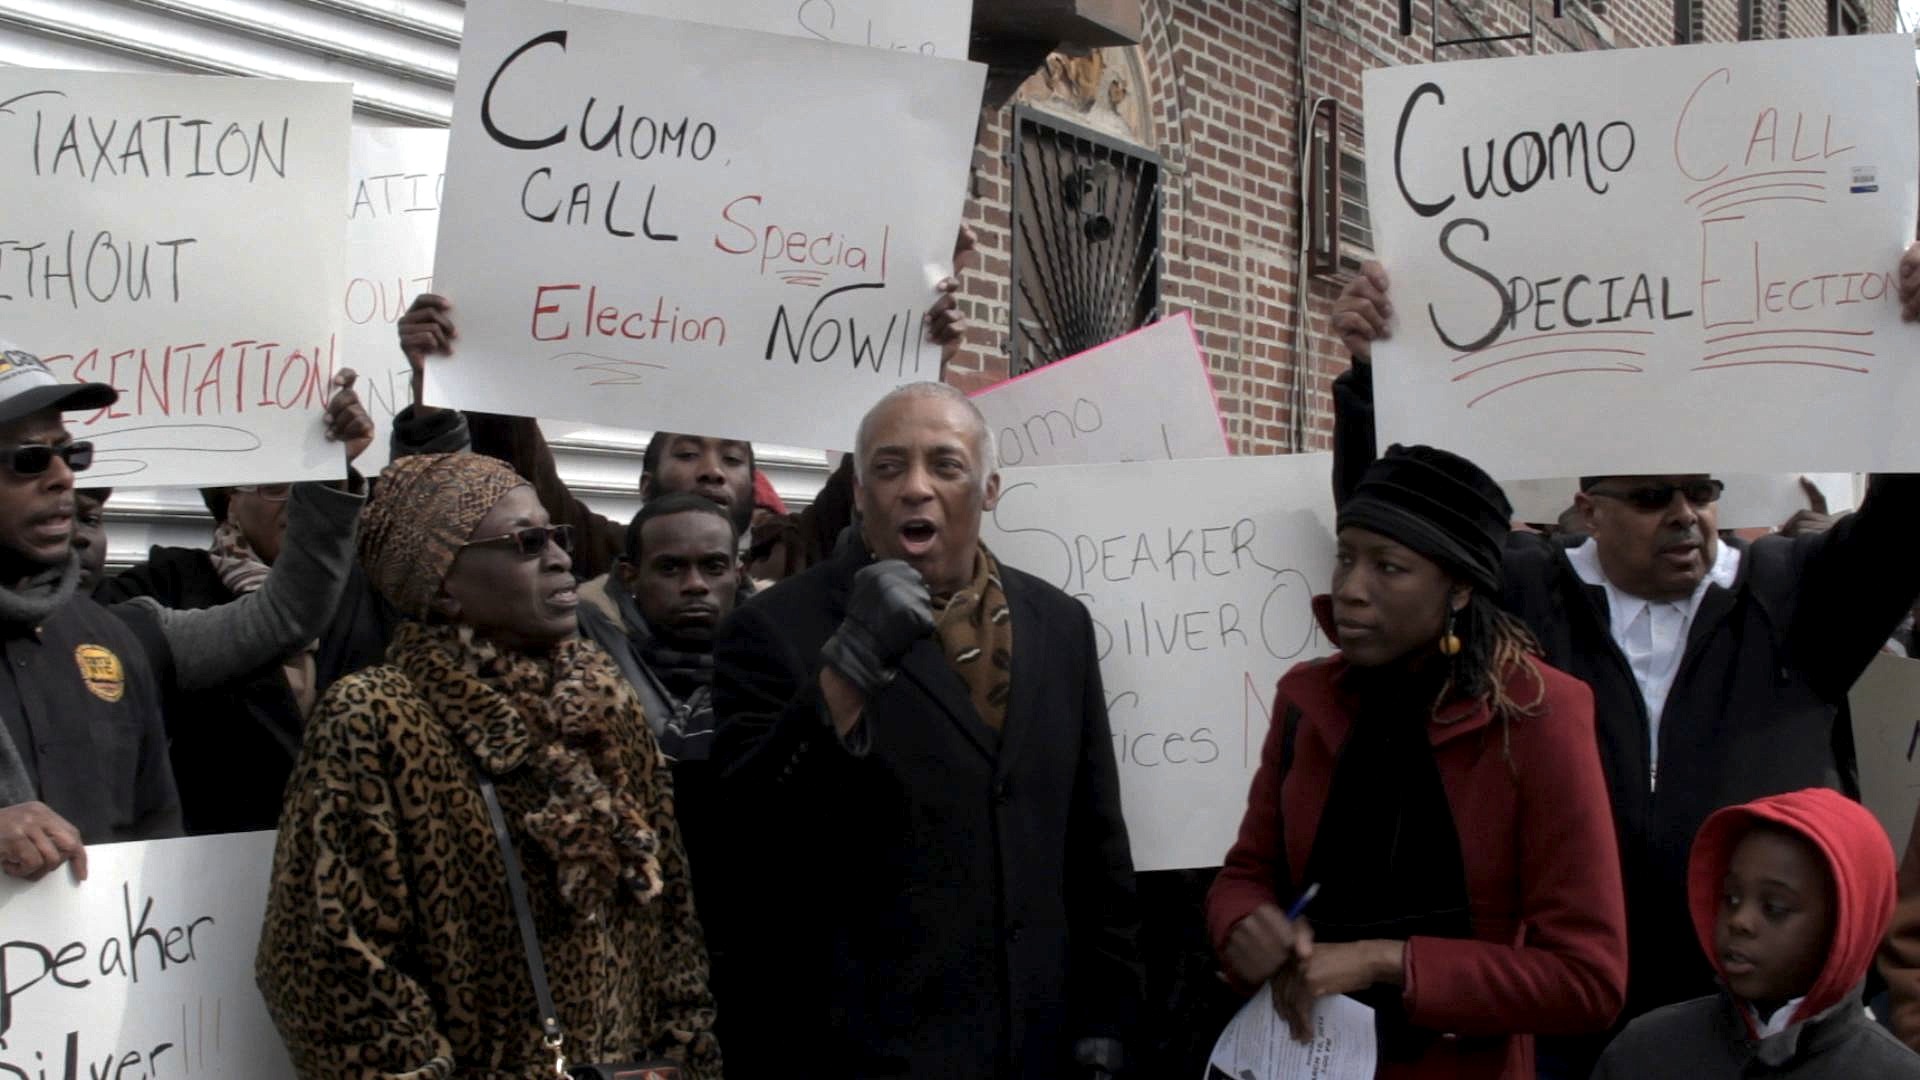 Charles Barron speaking to protestors at a rally to demanded special elections for 10 New York Assembly districts offices (65000)